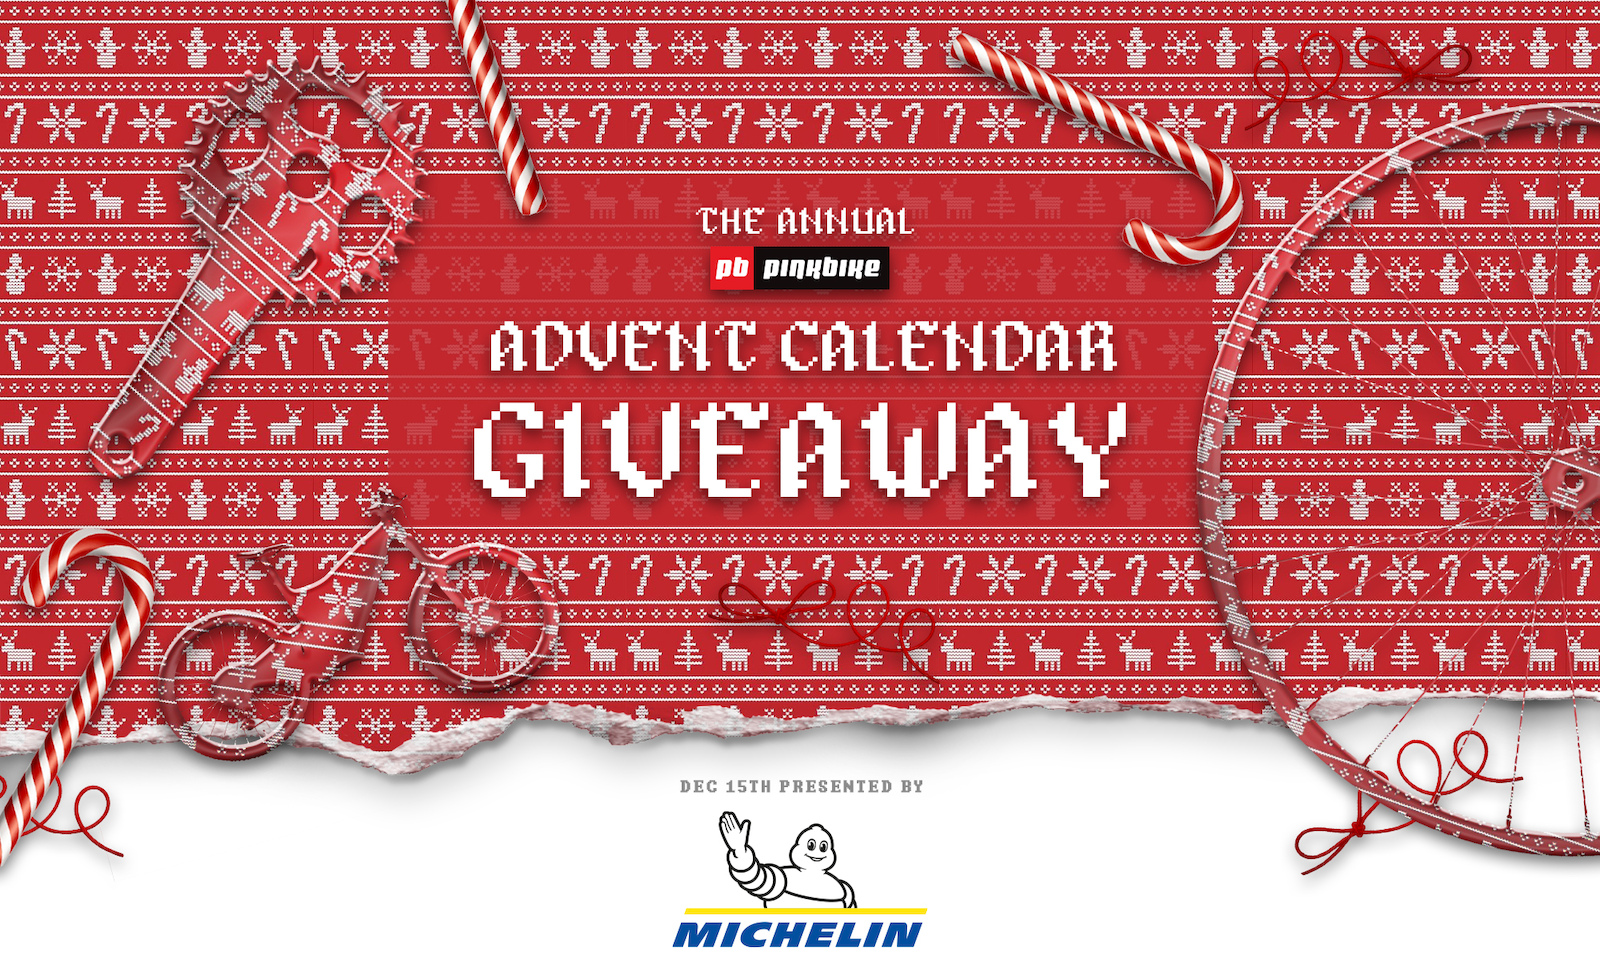 Enter to Win A Michelin Prize Pack Pinkbike's Advent Calendar